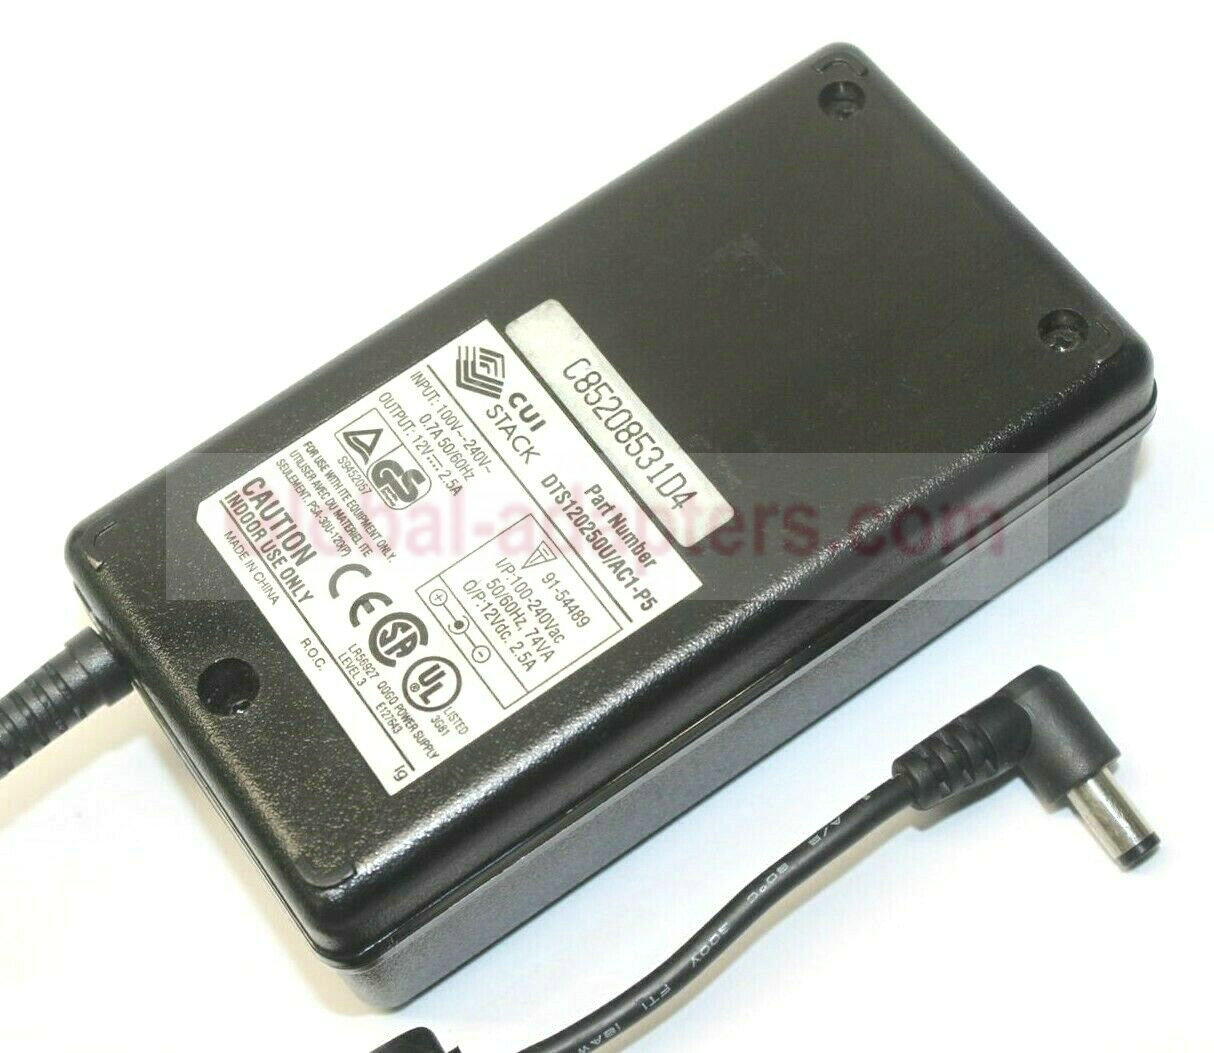 New 12V 2.5A CUI Stack DTS120250U/AC1-P5 POWER SUPPLY AC ADAPTER